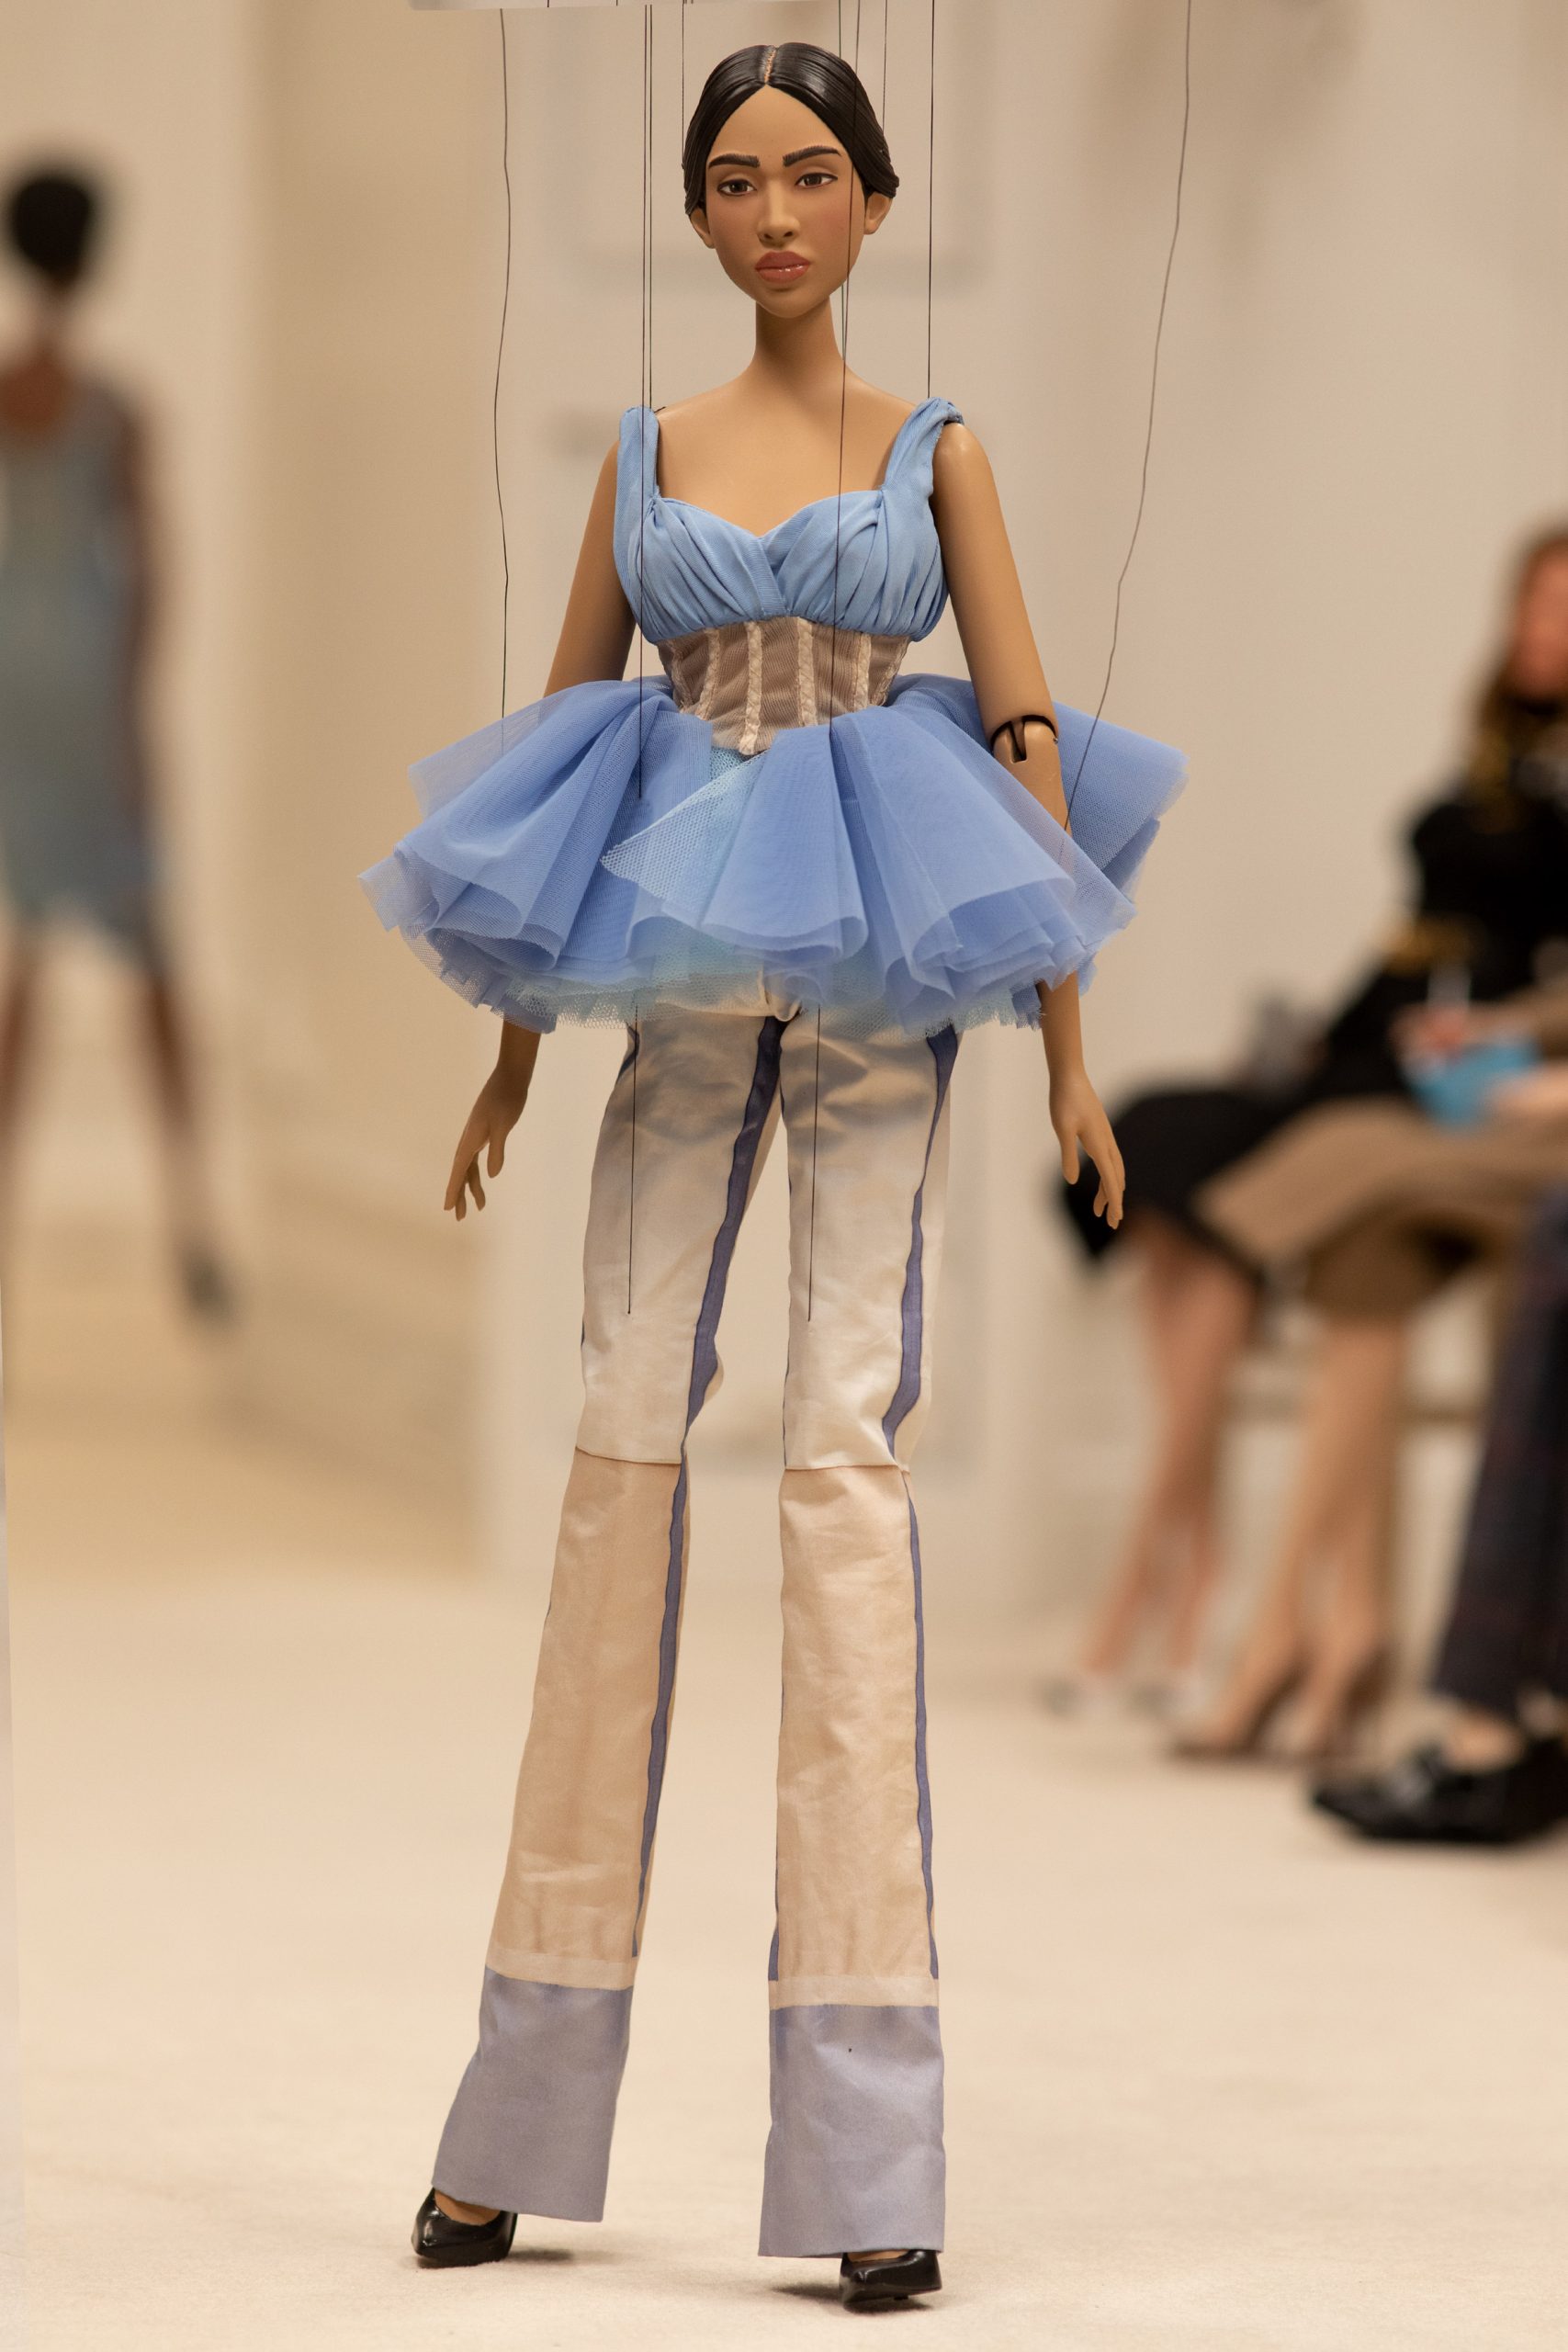 Puppets Made From Pre-Loved Clothing Strut The Catwalk In Debut